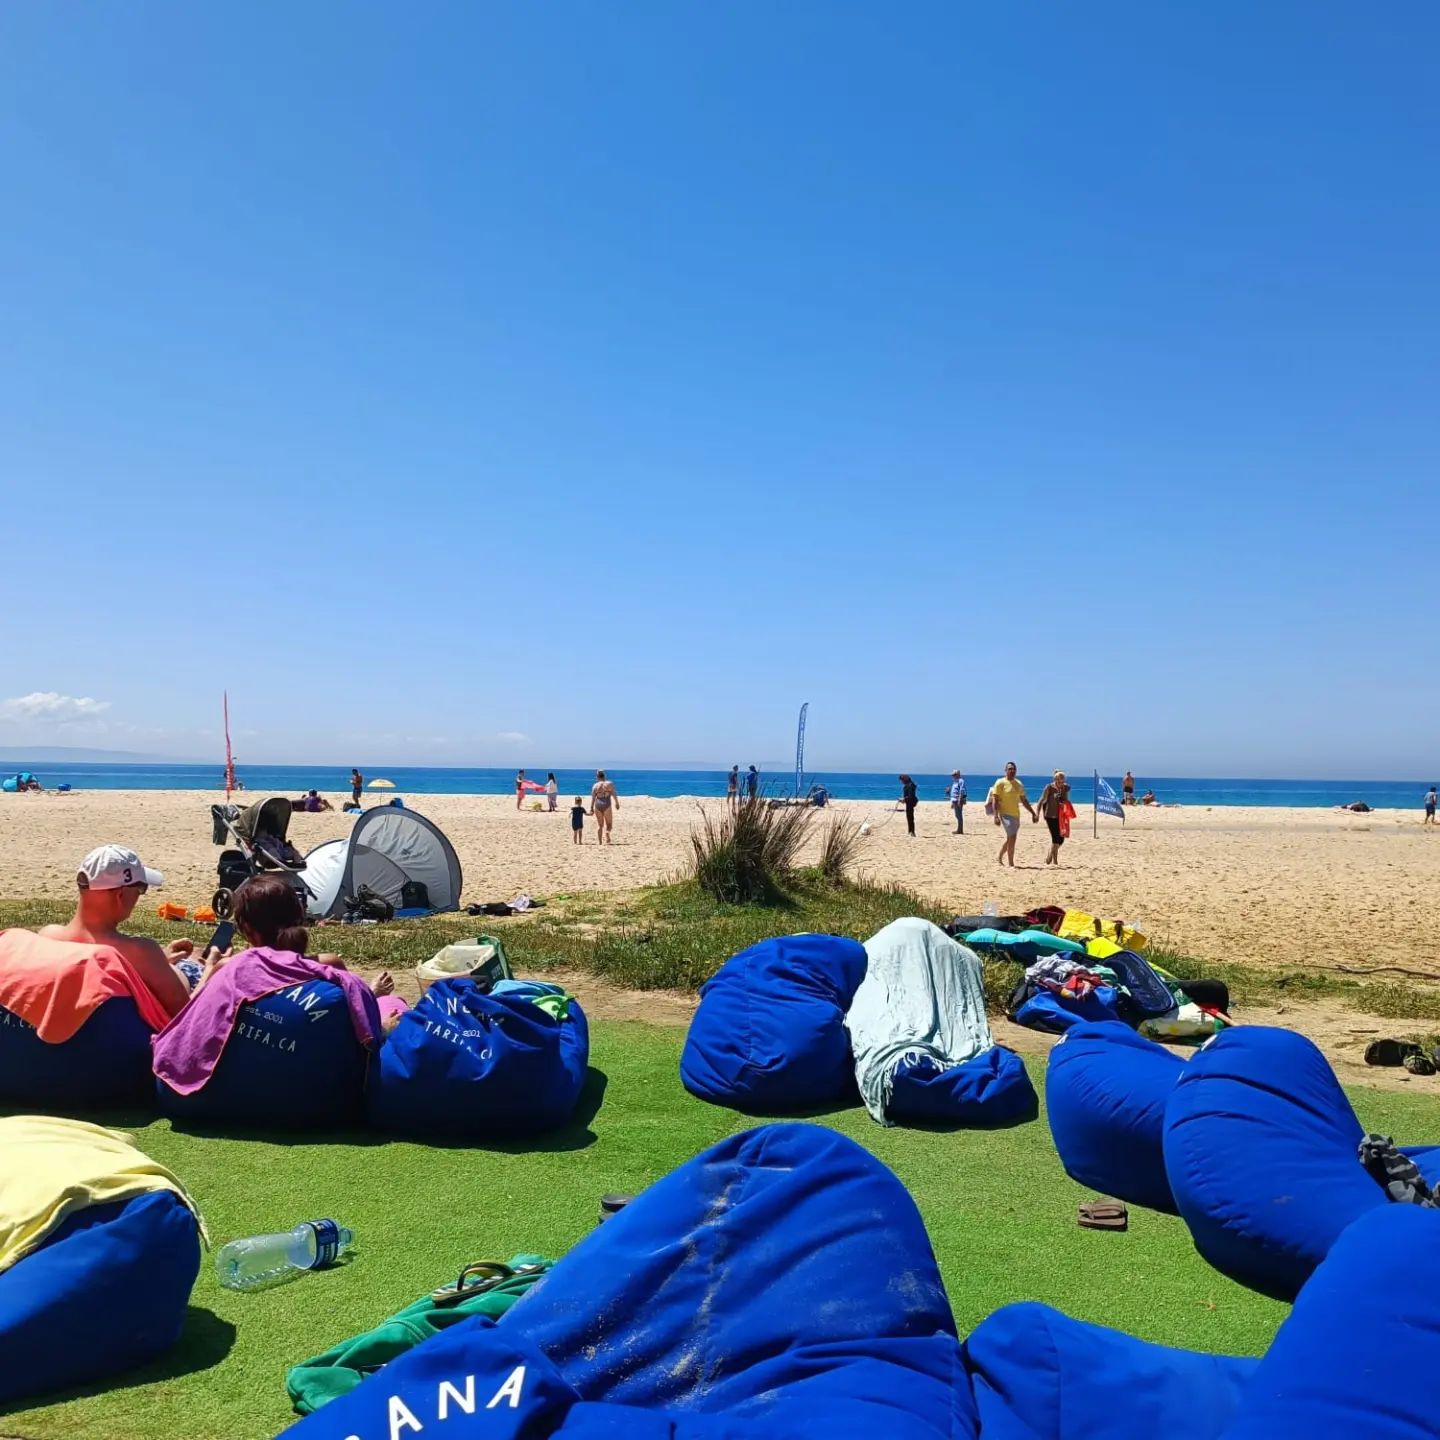 Waiting for the levante !!! Full of wind next week with summer temperatures around 20degrees🥰🥰🥰#tarifa #kiteboarding #surflife #lifestyle #holidays #summervibes☀️ #friends